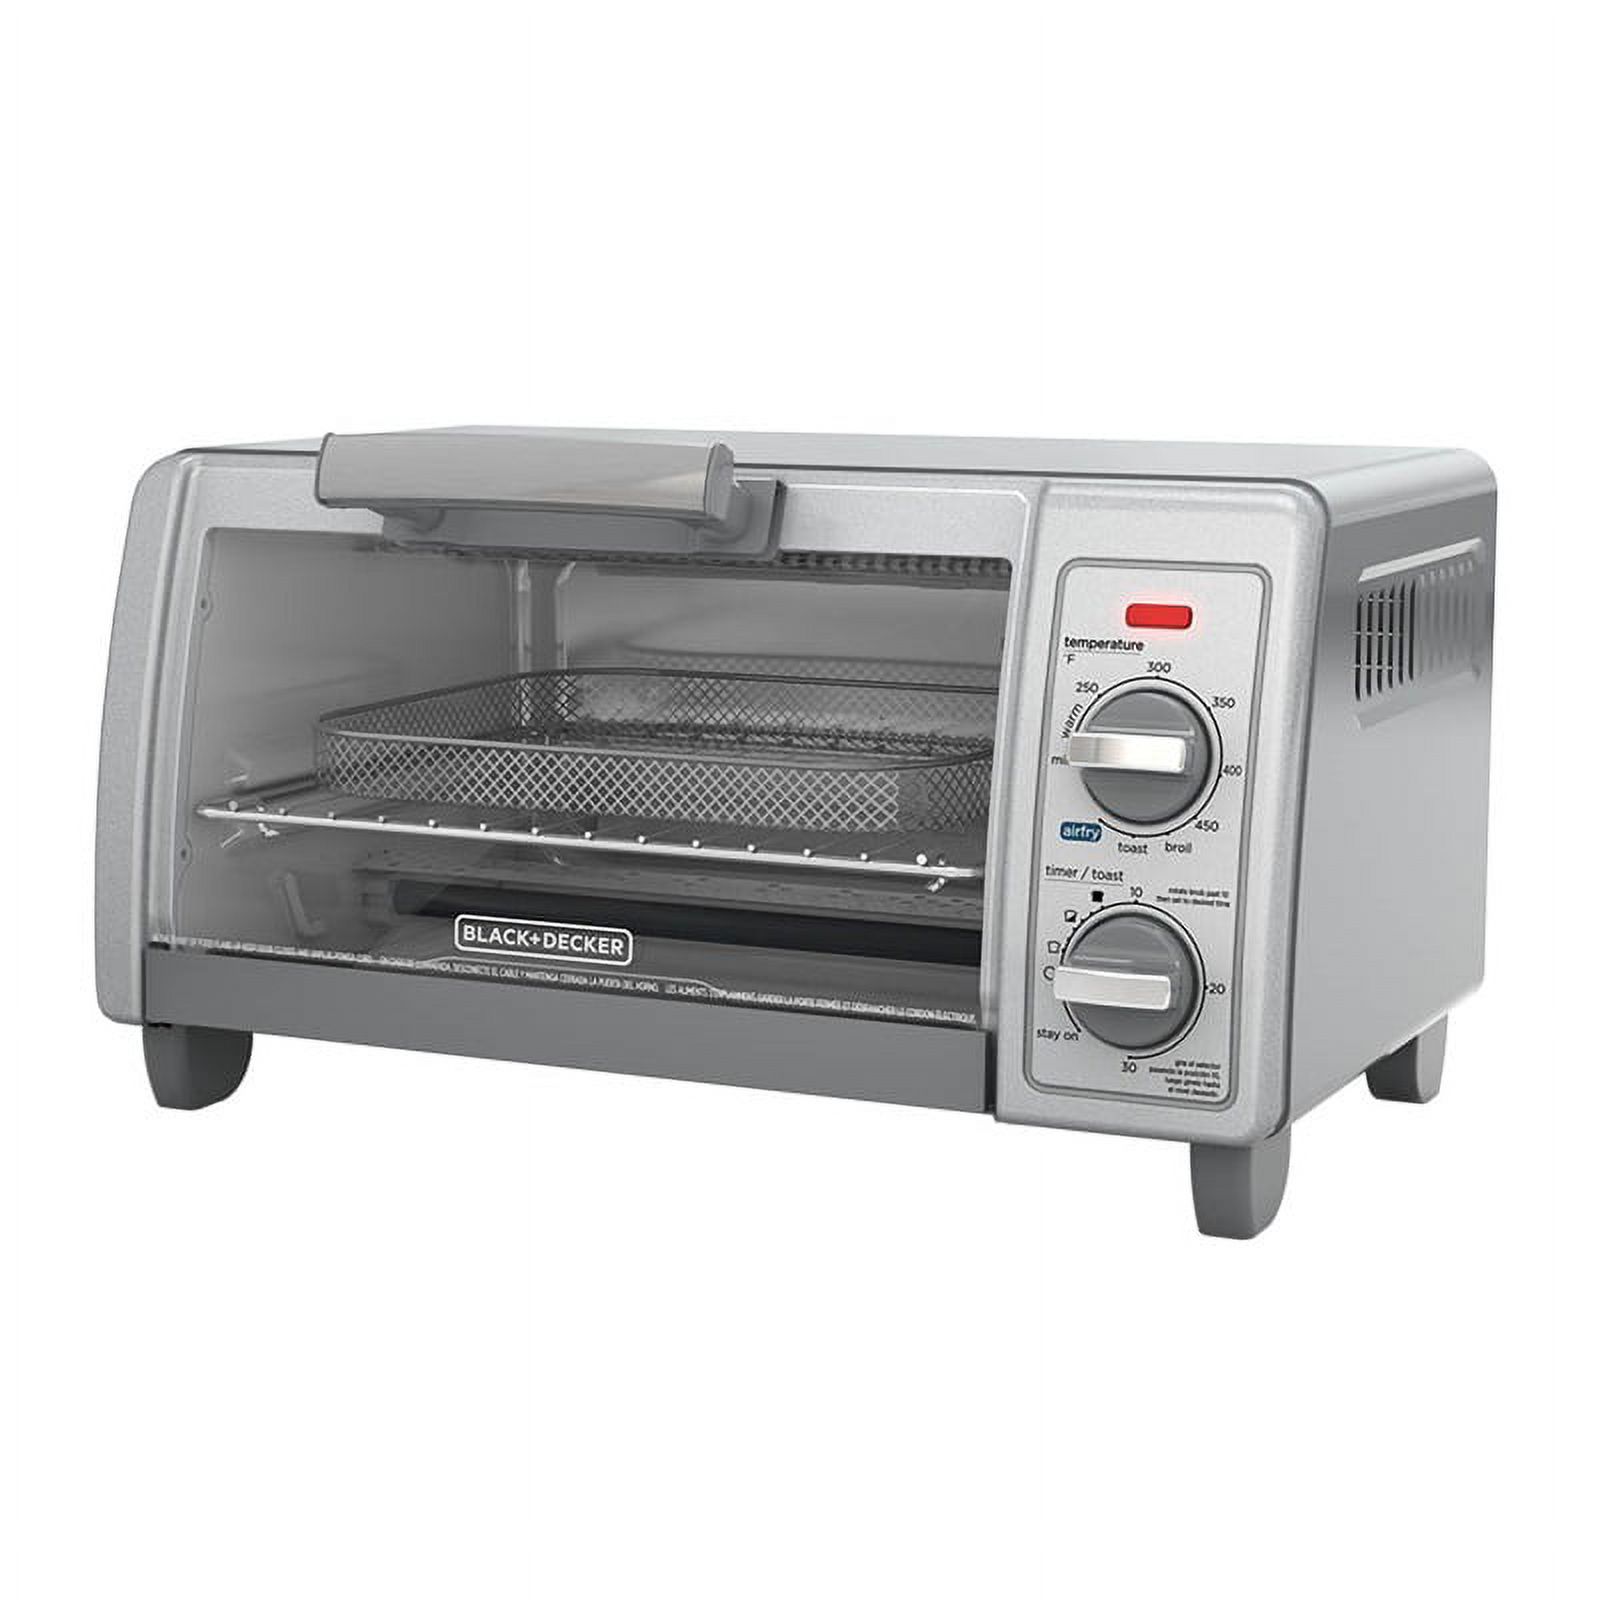 BD 4SL AIRFRY & TOASTER OVEN - image 2 of 2